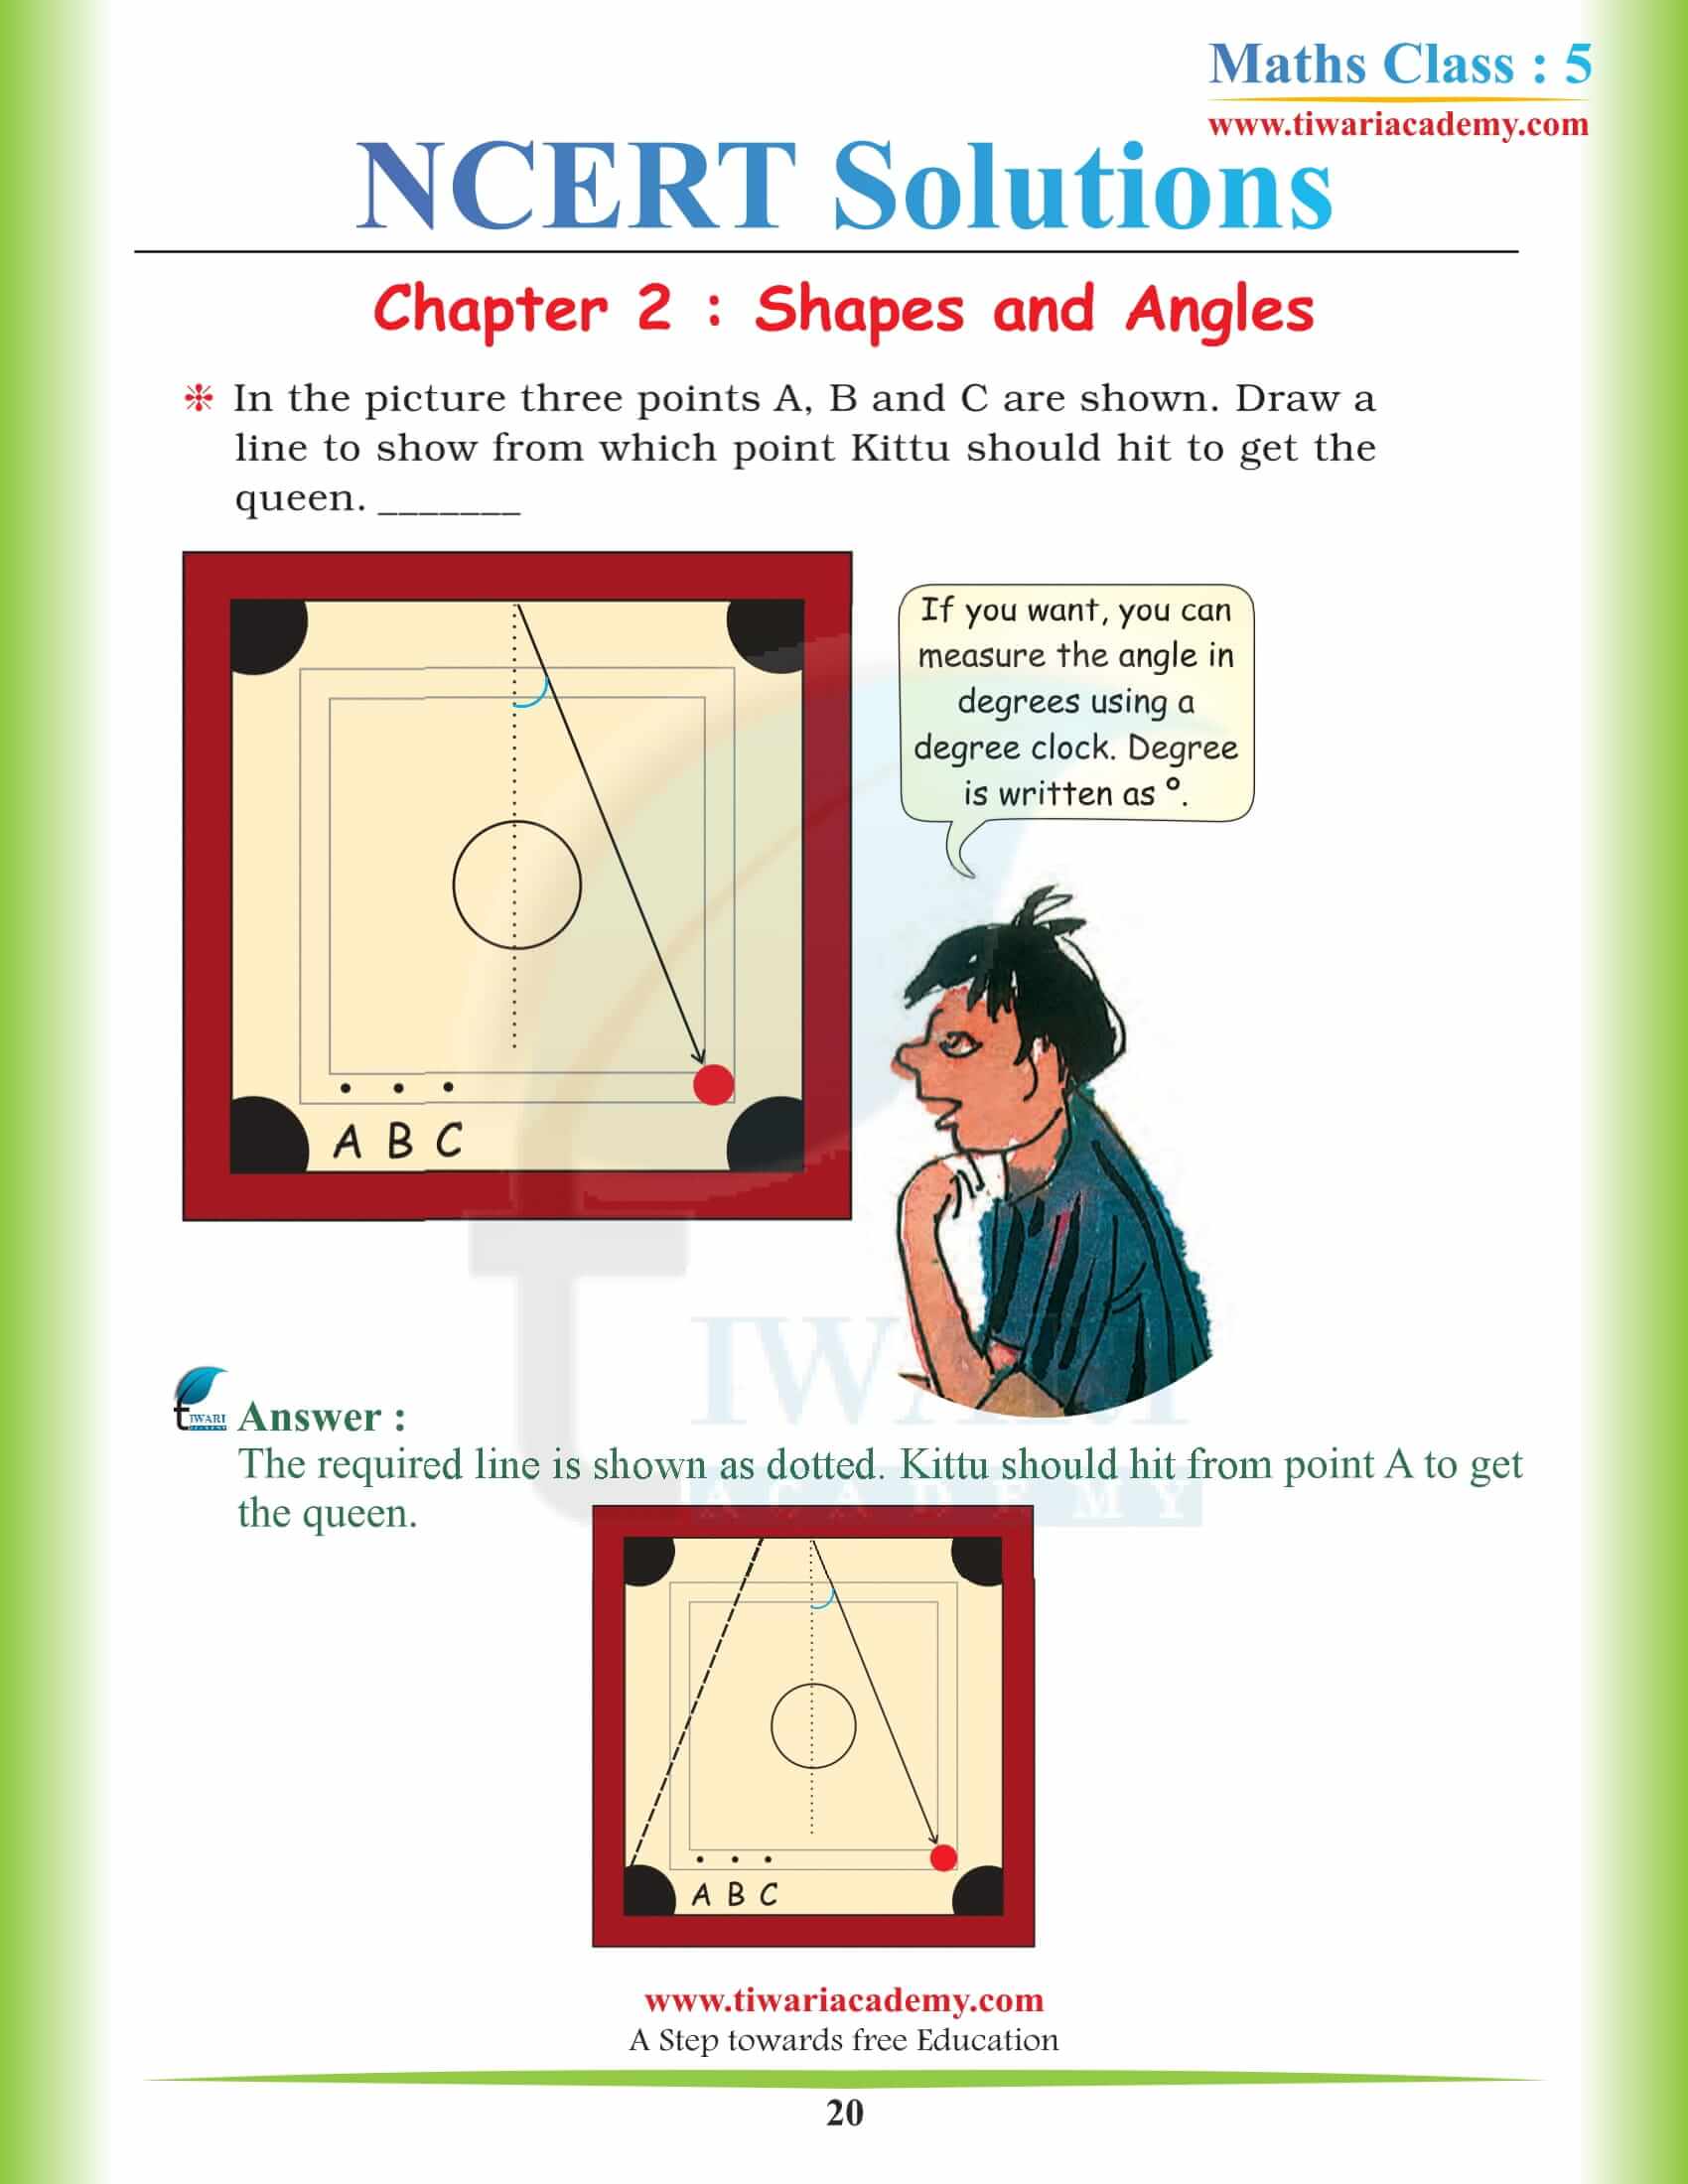 Class 5 Maths Magic Chapter 2 answers with sols